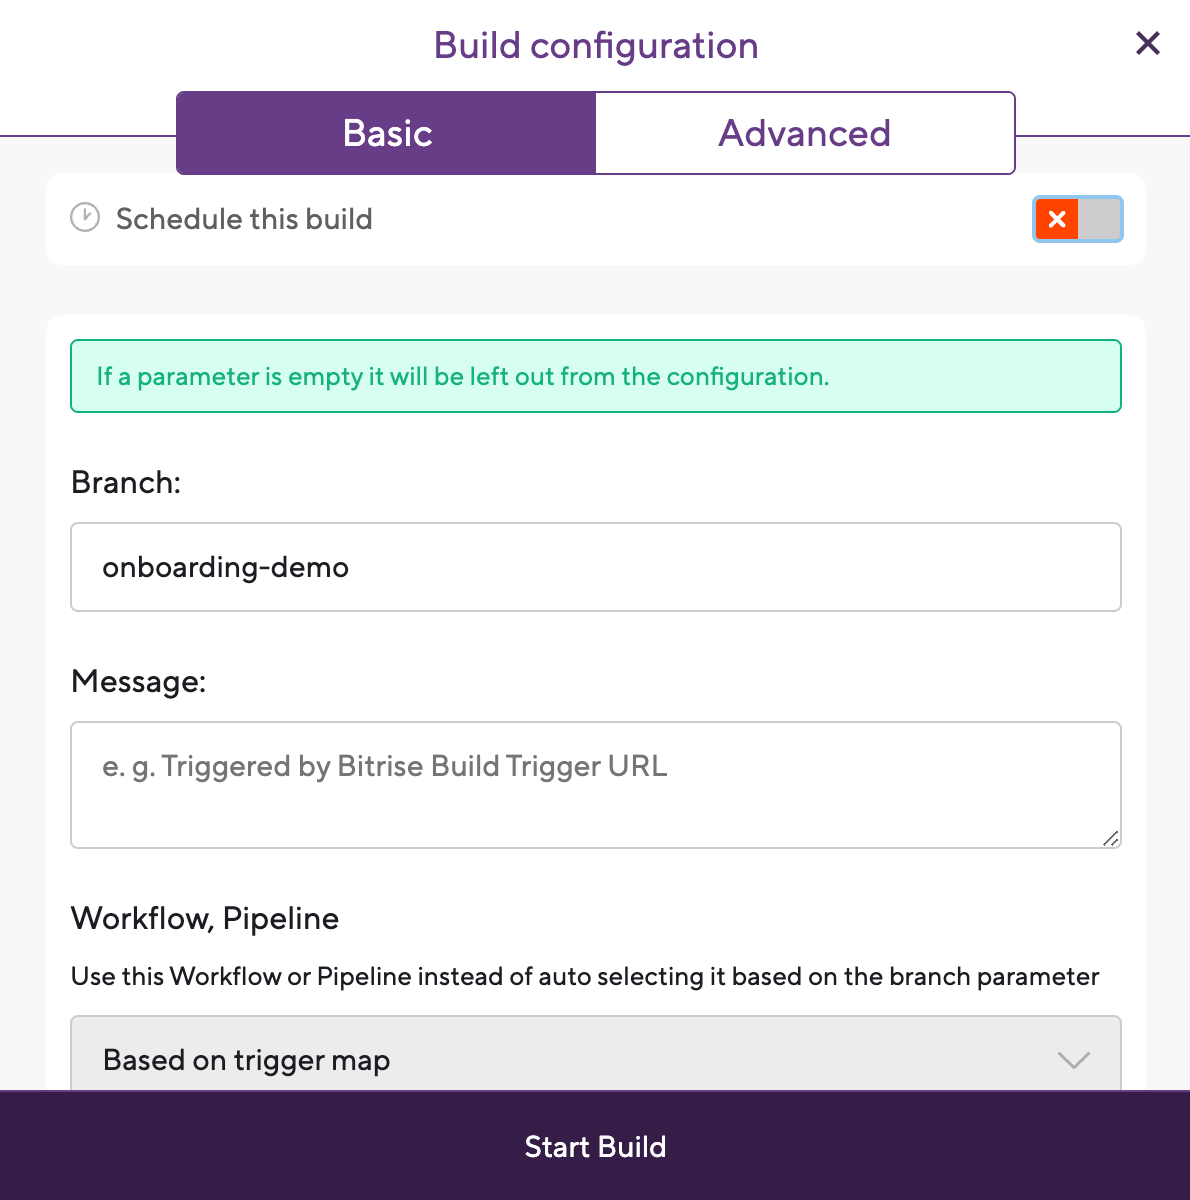 Scheduling your builds